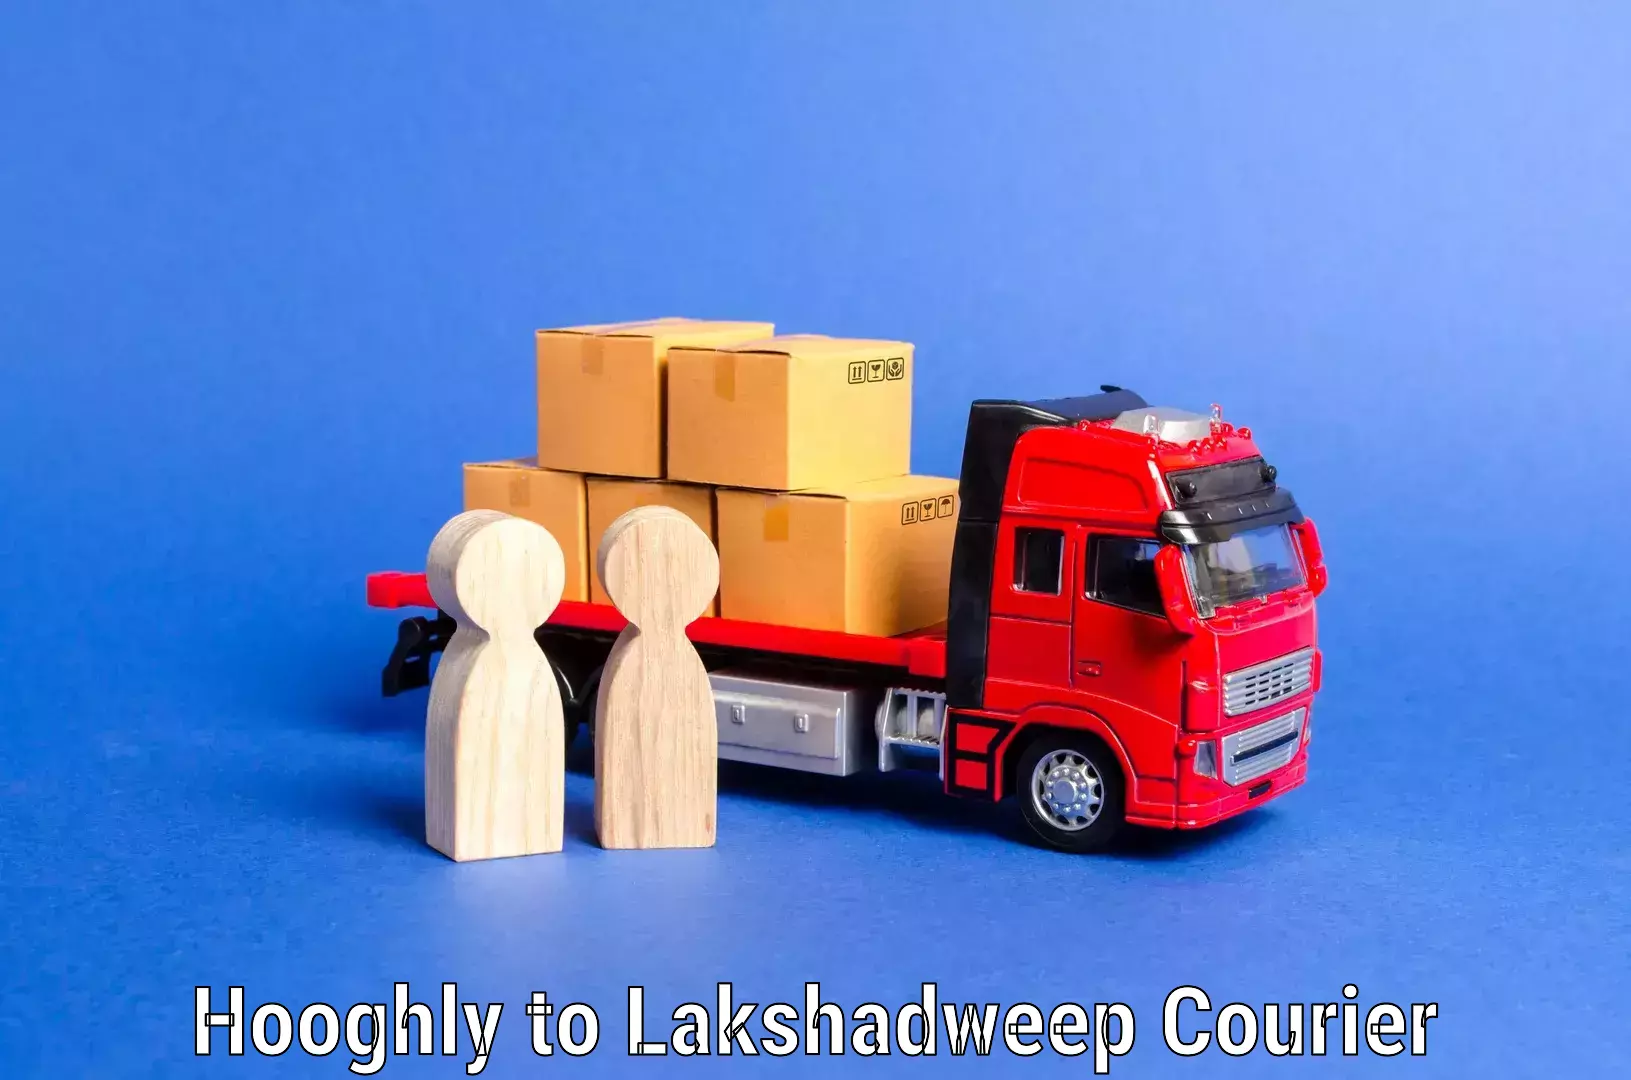 Specialized moving company Hooghly to Lakshadweep